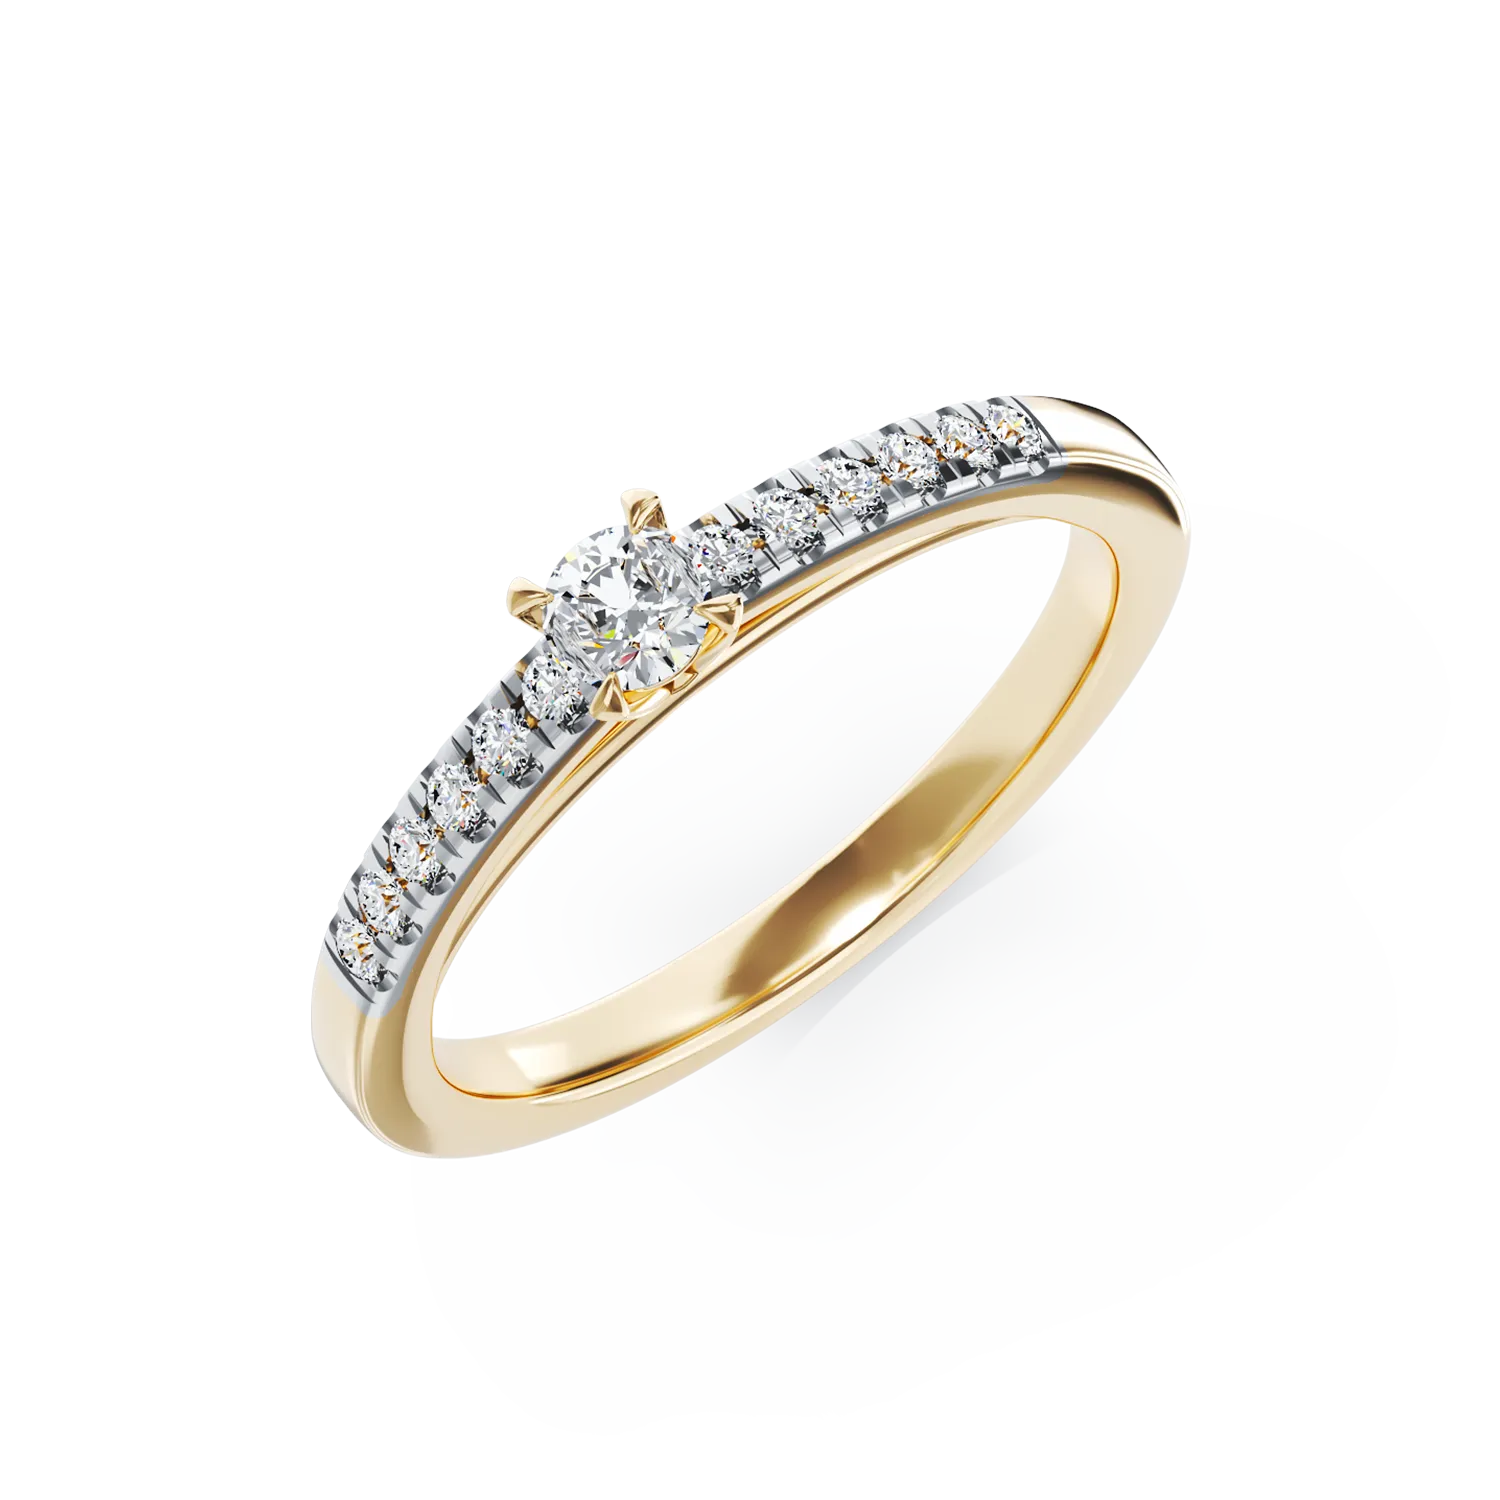 18K yellow gold engagement ring with 0.25ct diamond and 0.13ct diamonds